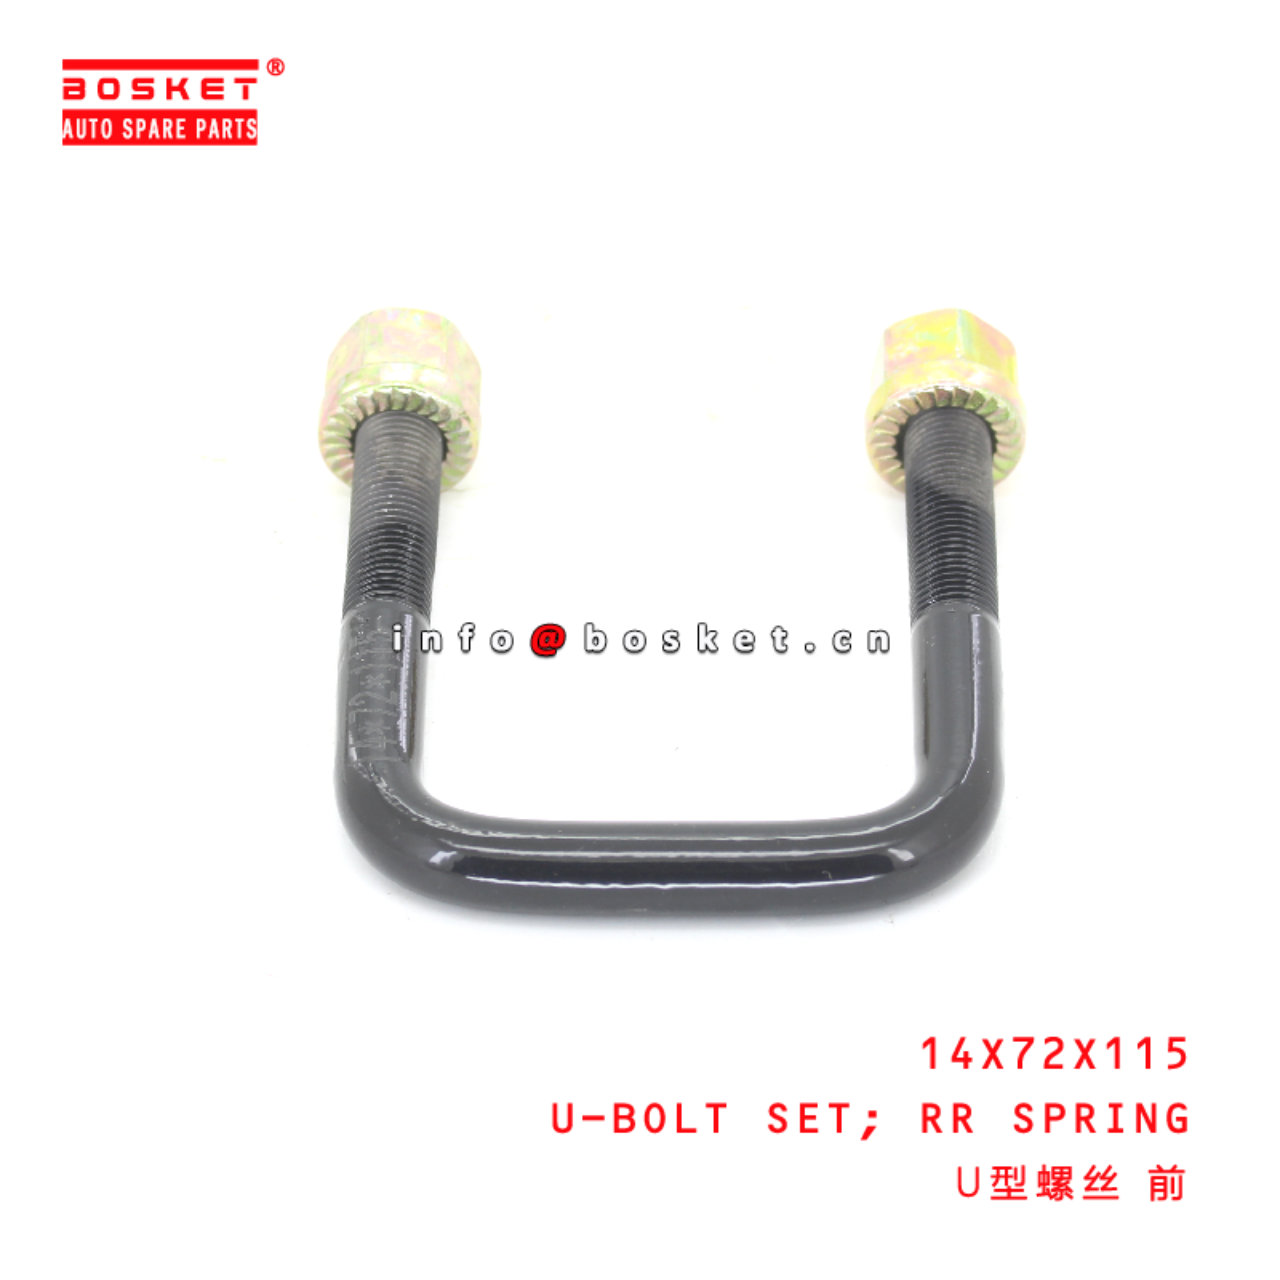 8970849382 8-97084938-2 Inlet Cover Gasket Suitable for ISUZU XD 